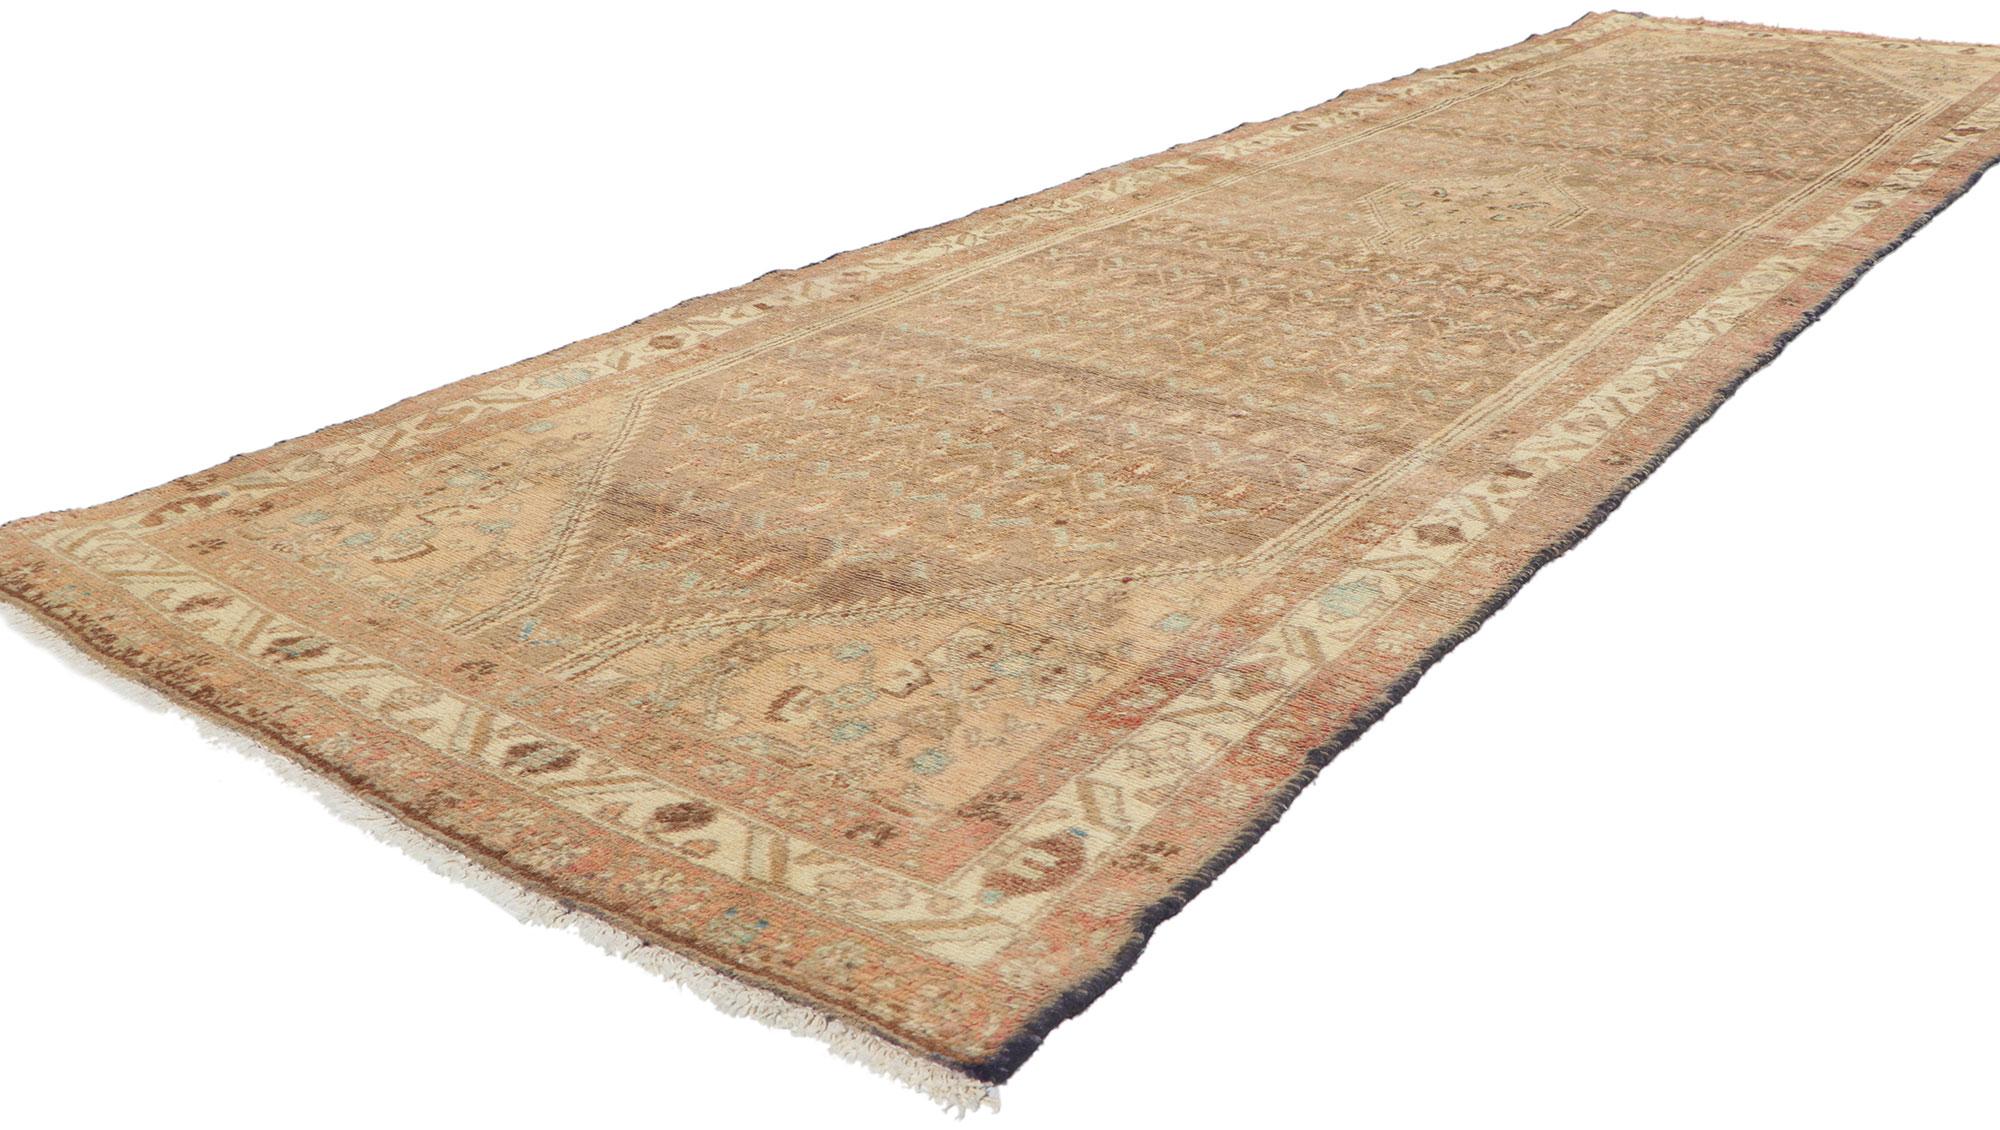 61146 vintage Persian hamadan Runner, 03'02 x 11'01. With its effortless beauty and timeless design, this hand knotted wool vintage Persian Hanadan carpet runner will take on a curated lived-in look that feels timeless while imparting a sense of